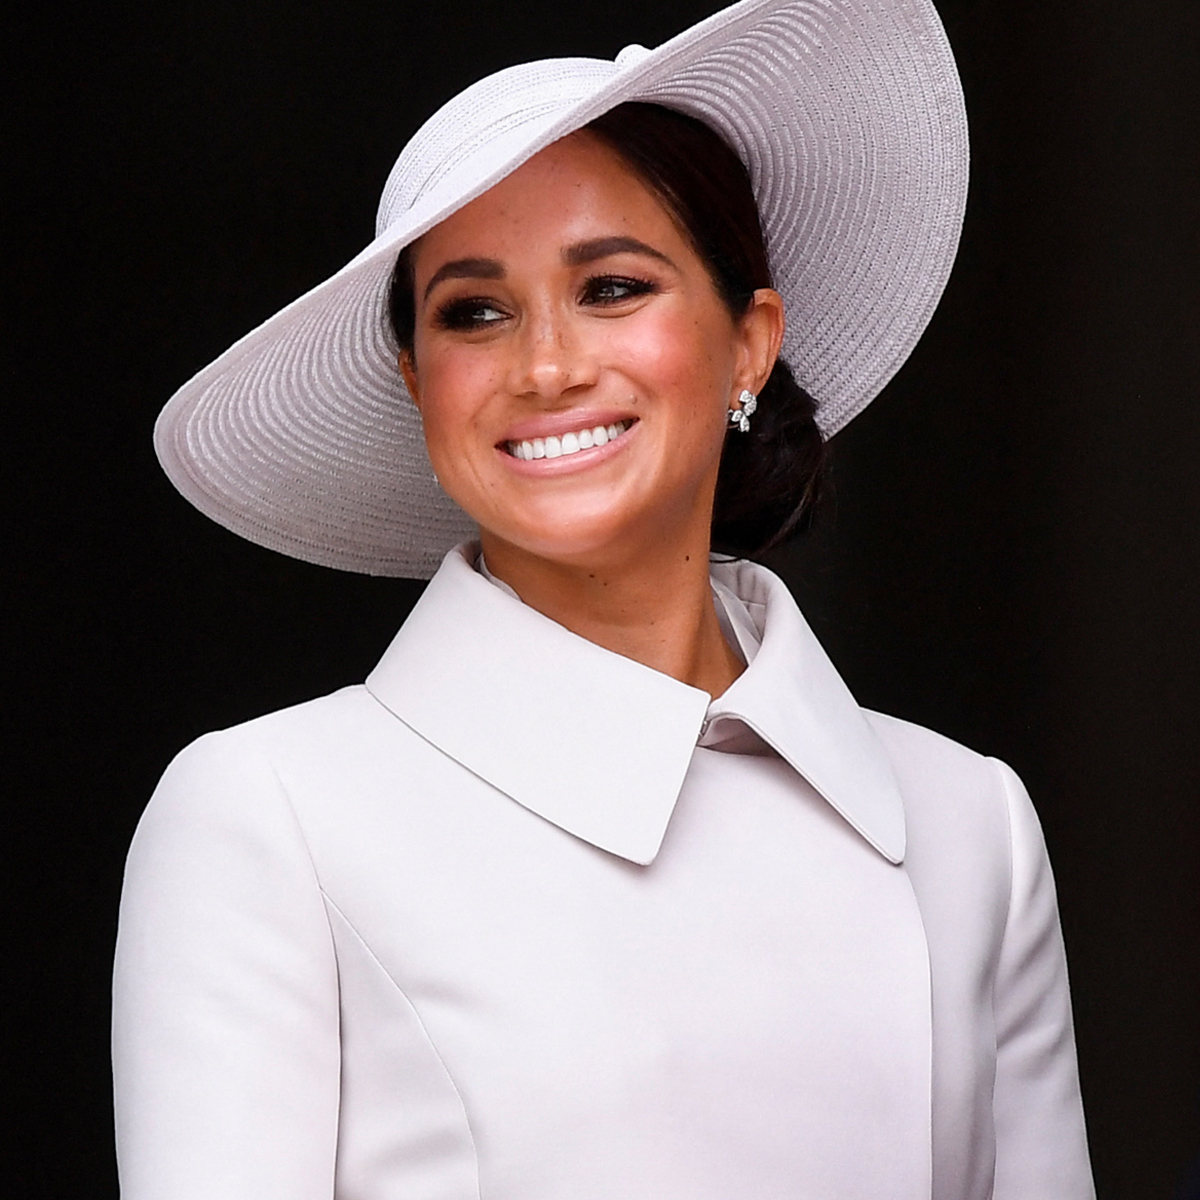 Does Meghan Markle Foresee a Relationship With Royal Family in the Future? She Says...